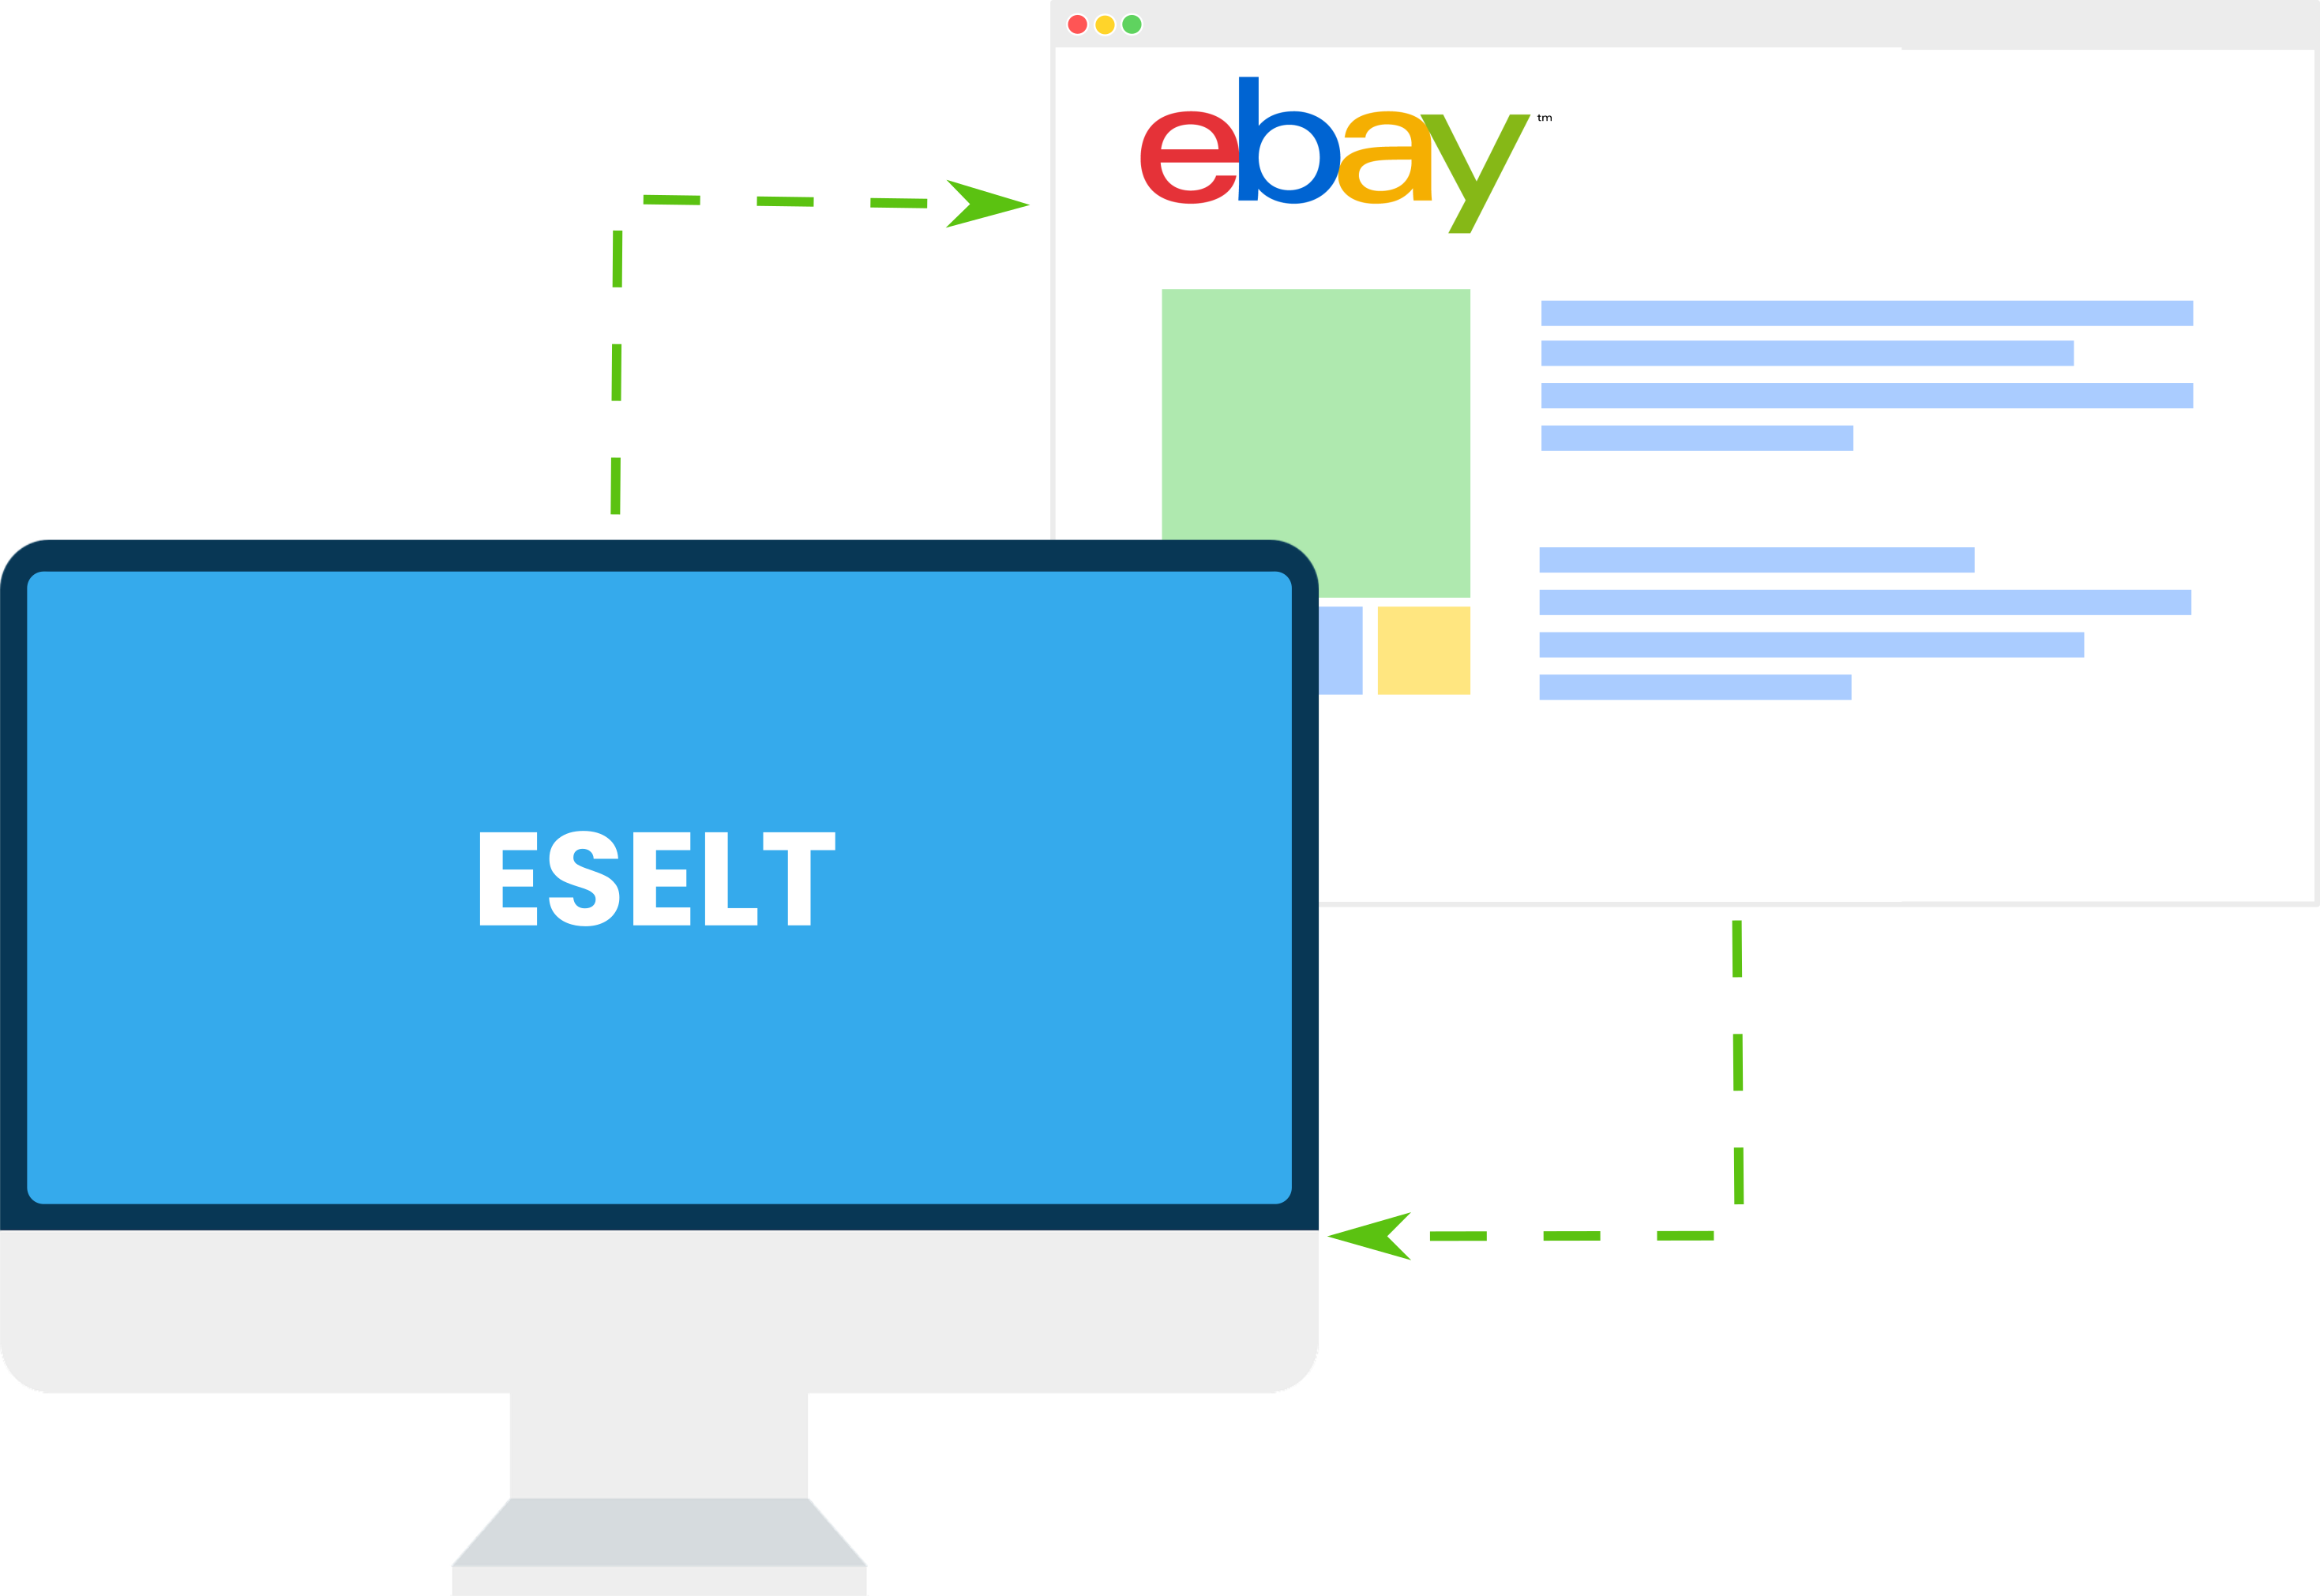 Templates for eBay